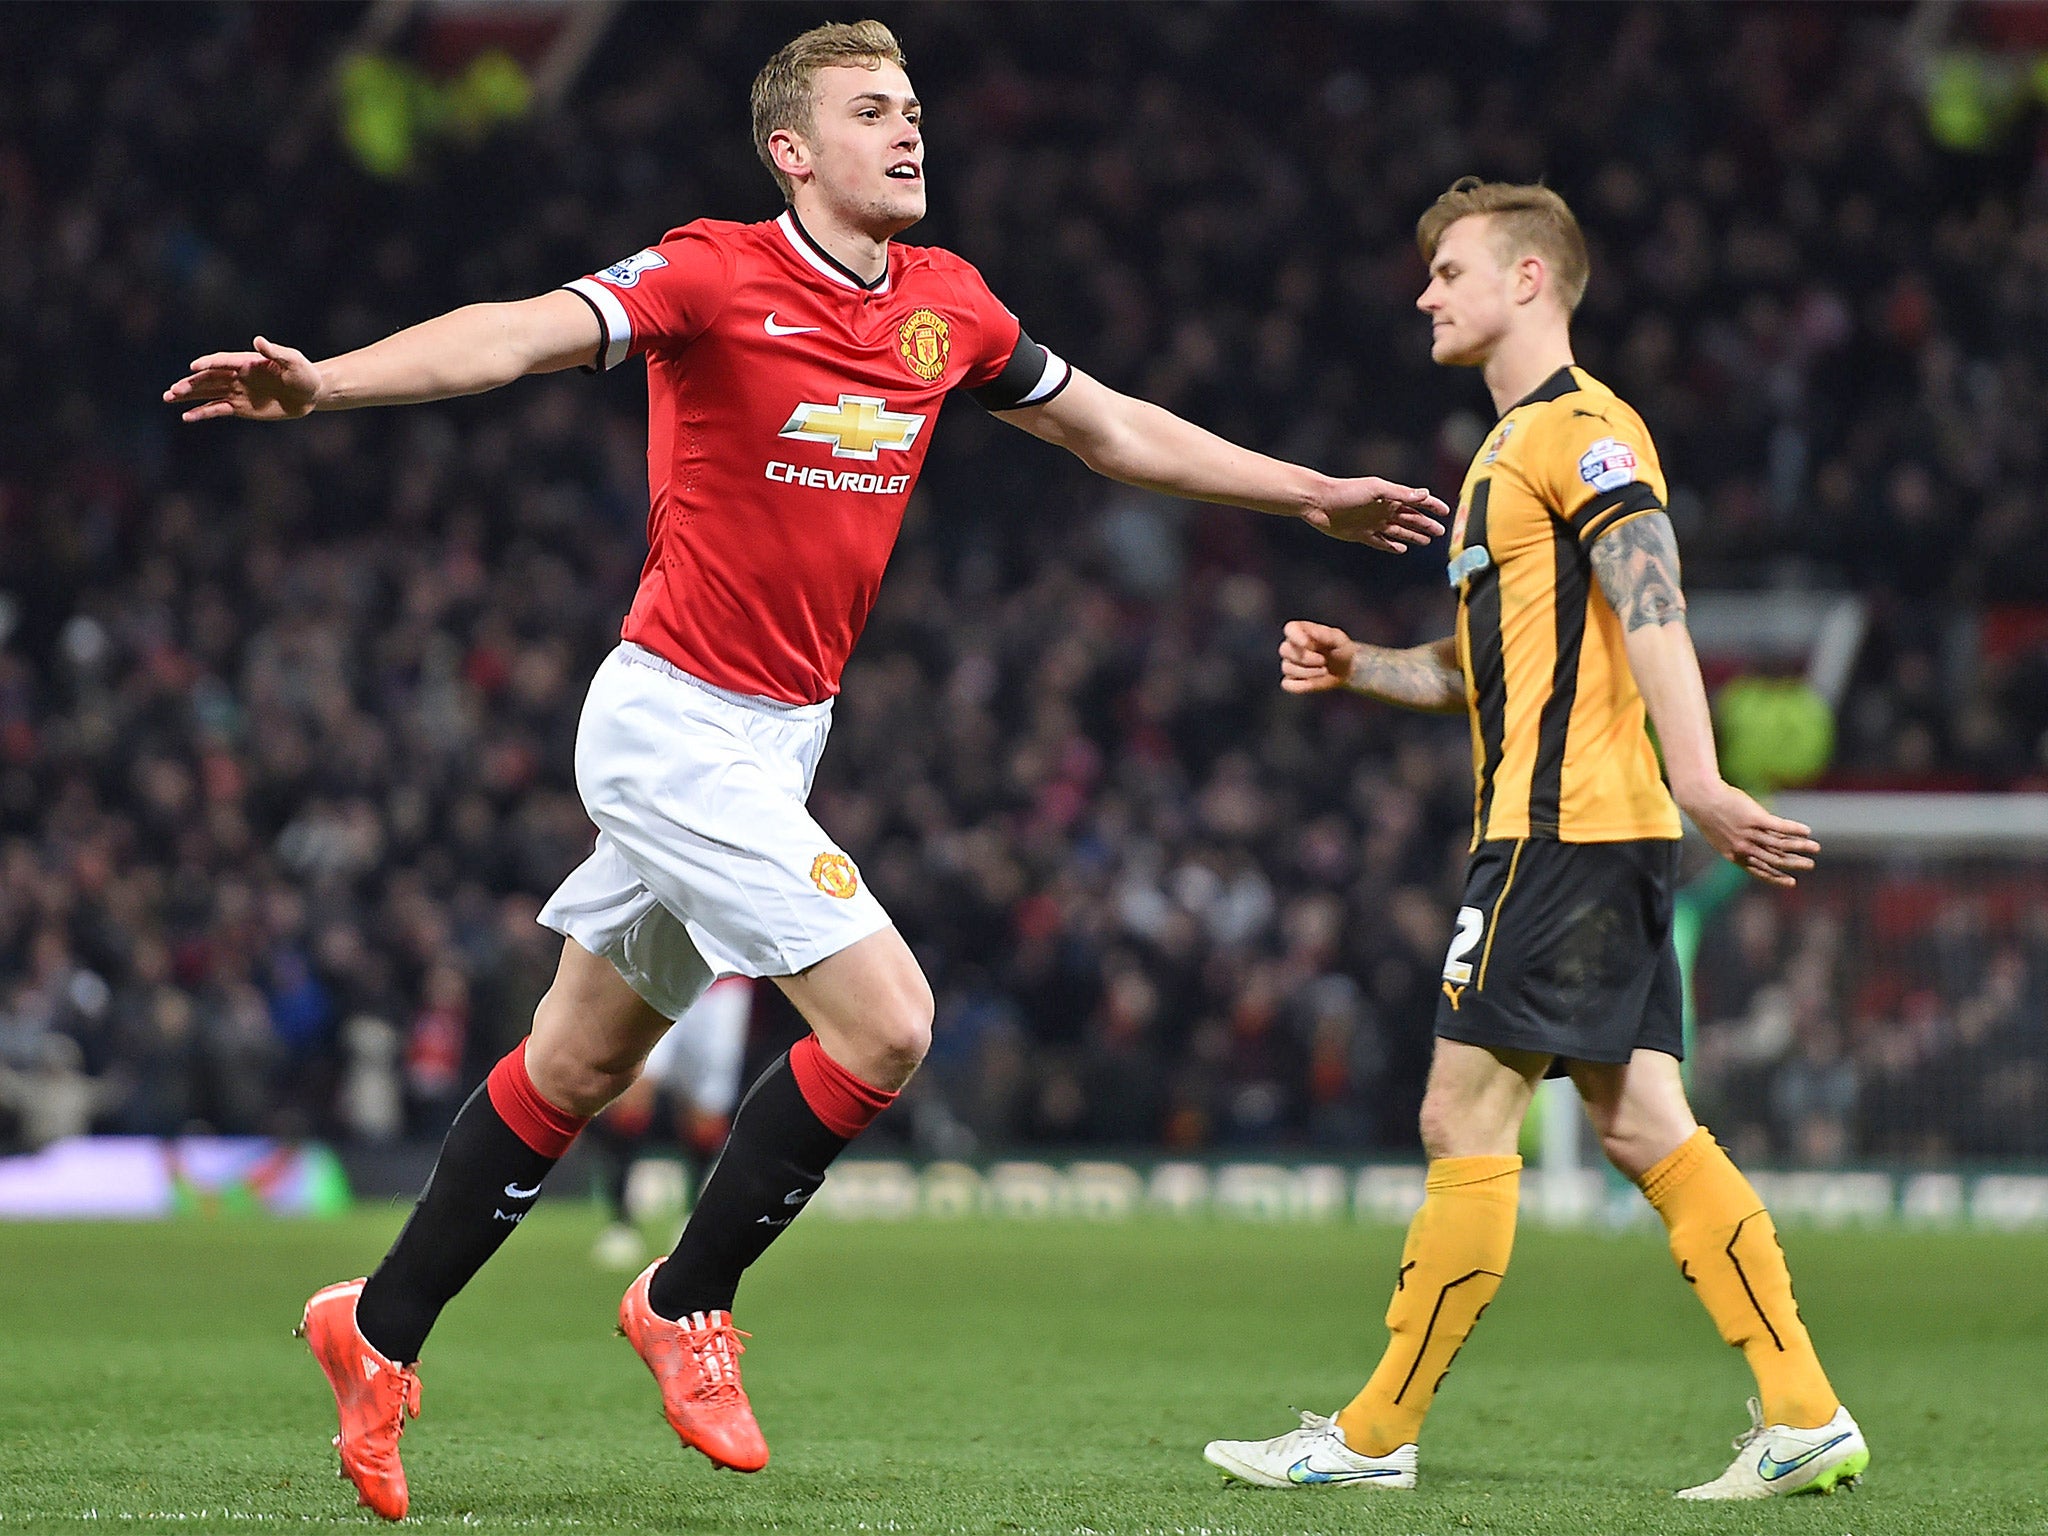 James Wilson celebrates after scoring Manchester United's third goal